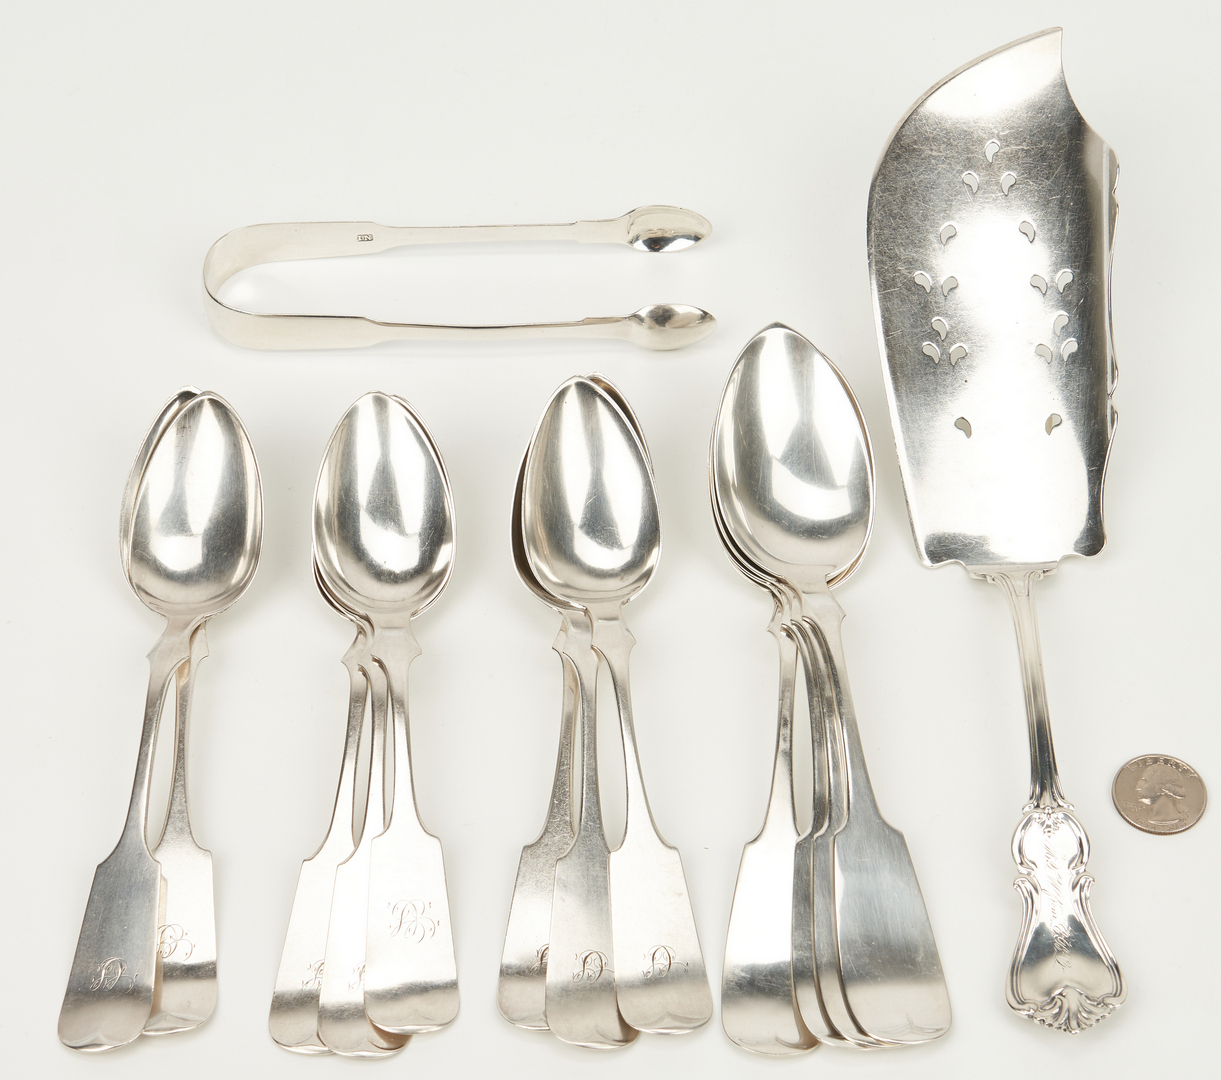 Lot 248: Coin silver fish slice and spoons plus English tongs